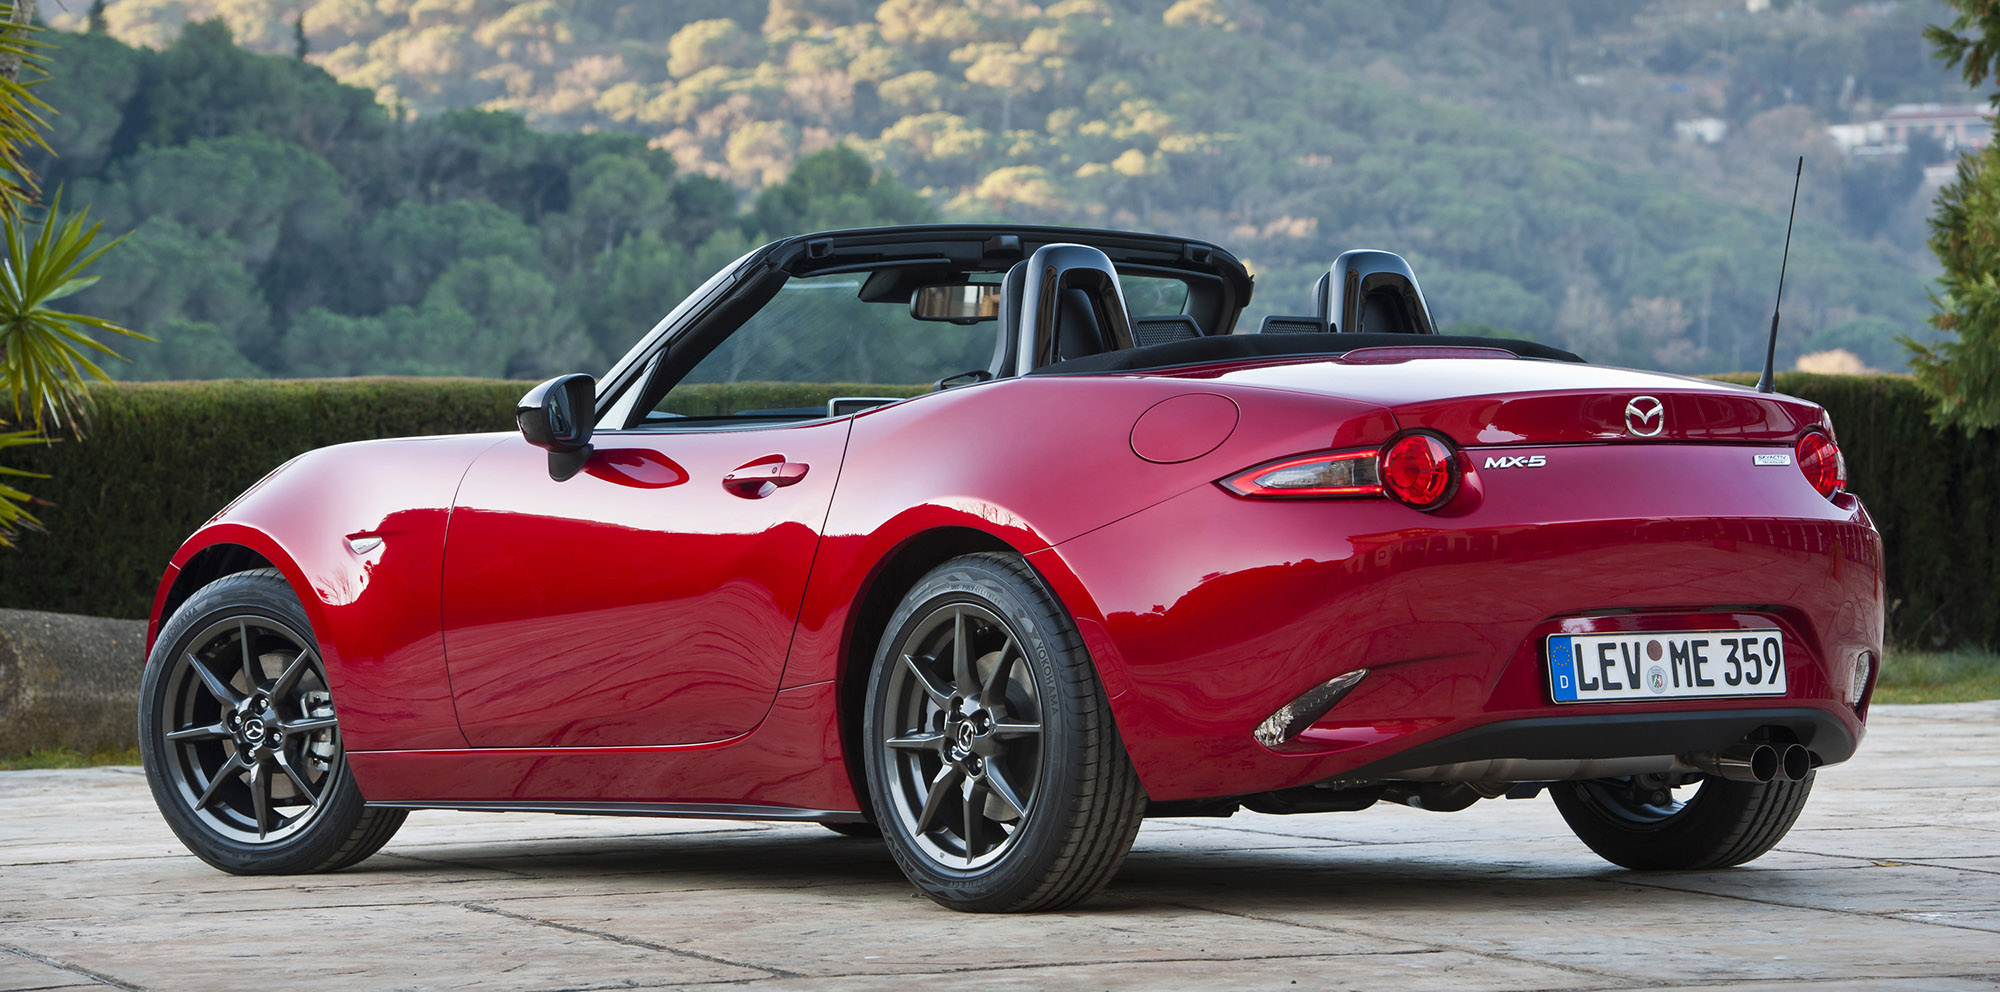 2015 Mazda MX-5 will feature 96kW 1.5-litre direct-injection engine - photos | CarAdvice